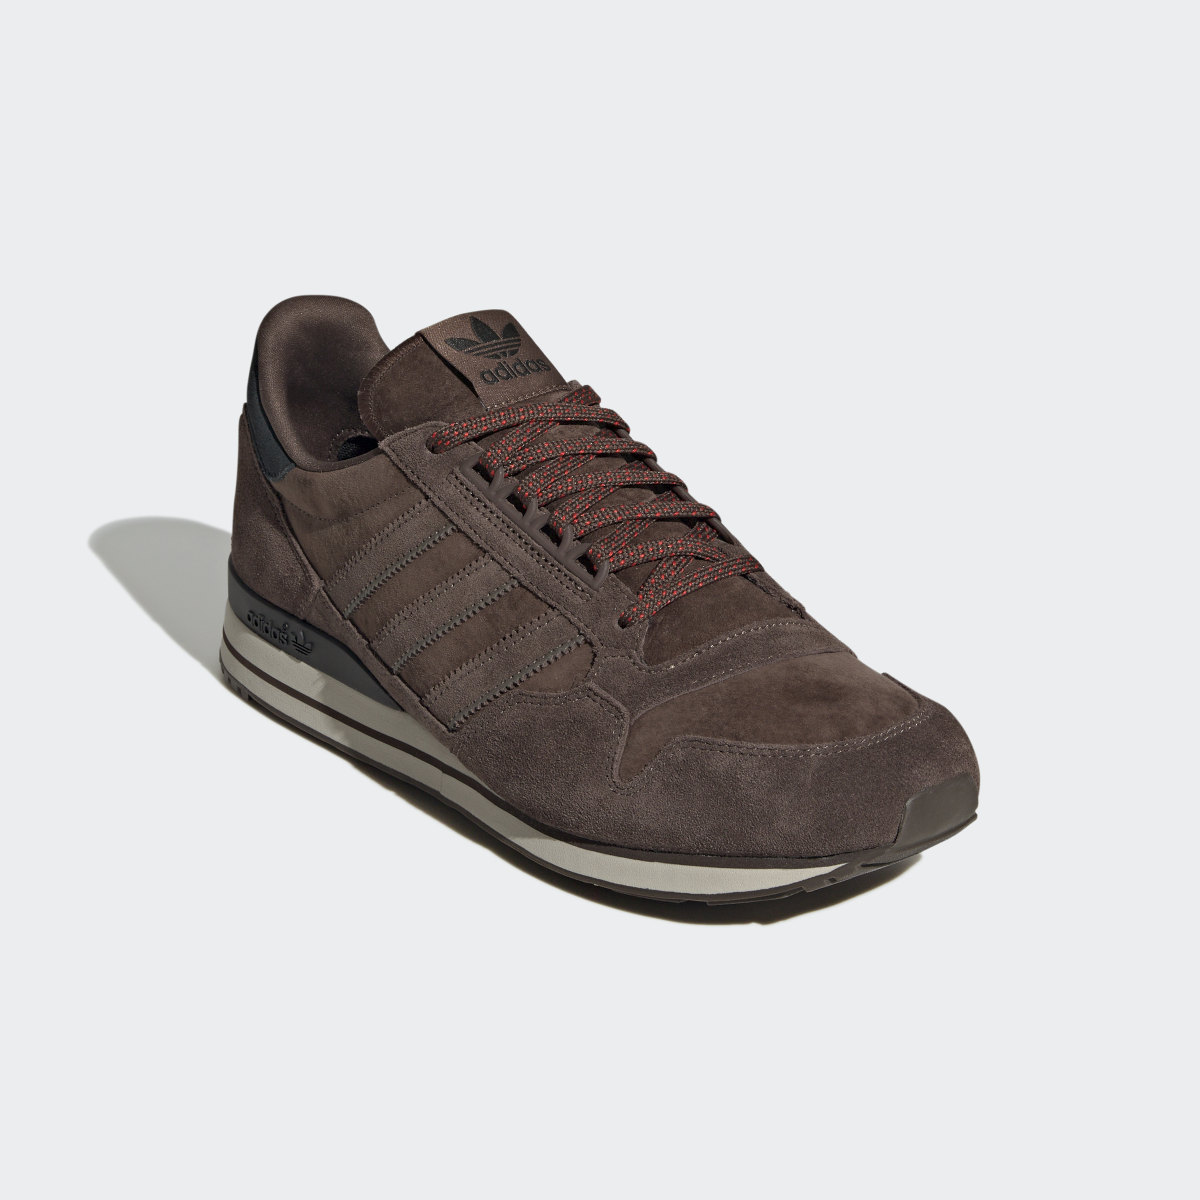 Adidas ZX 500 Shoes. 5